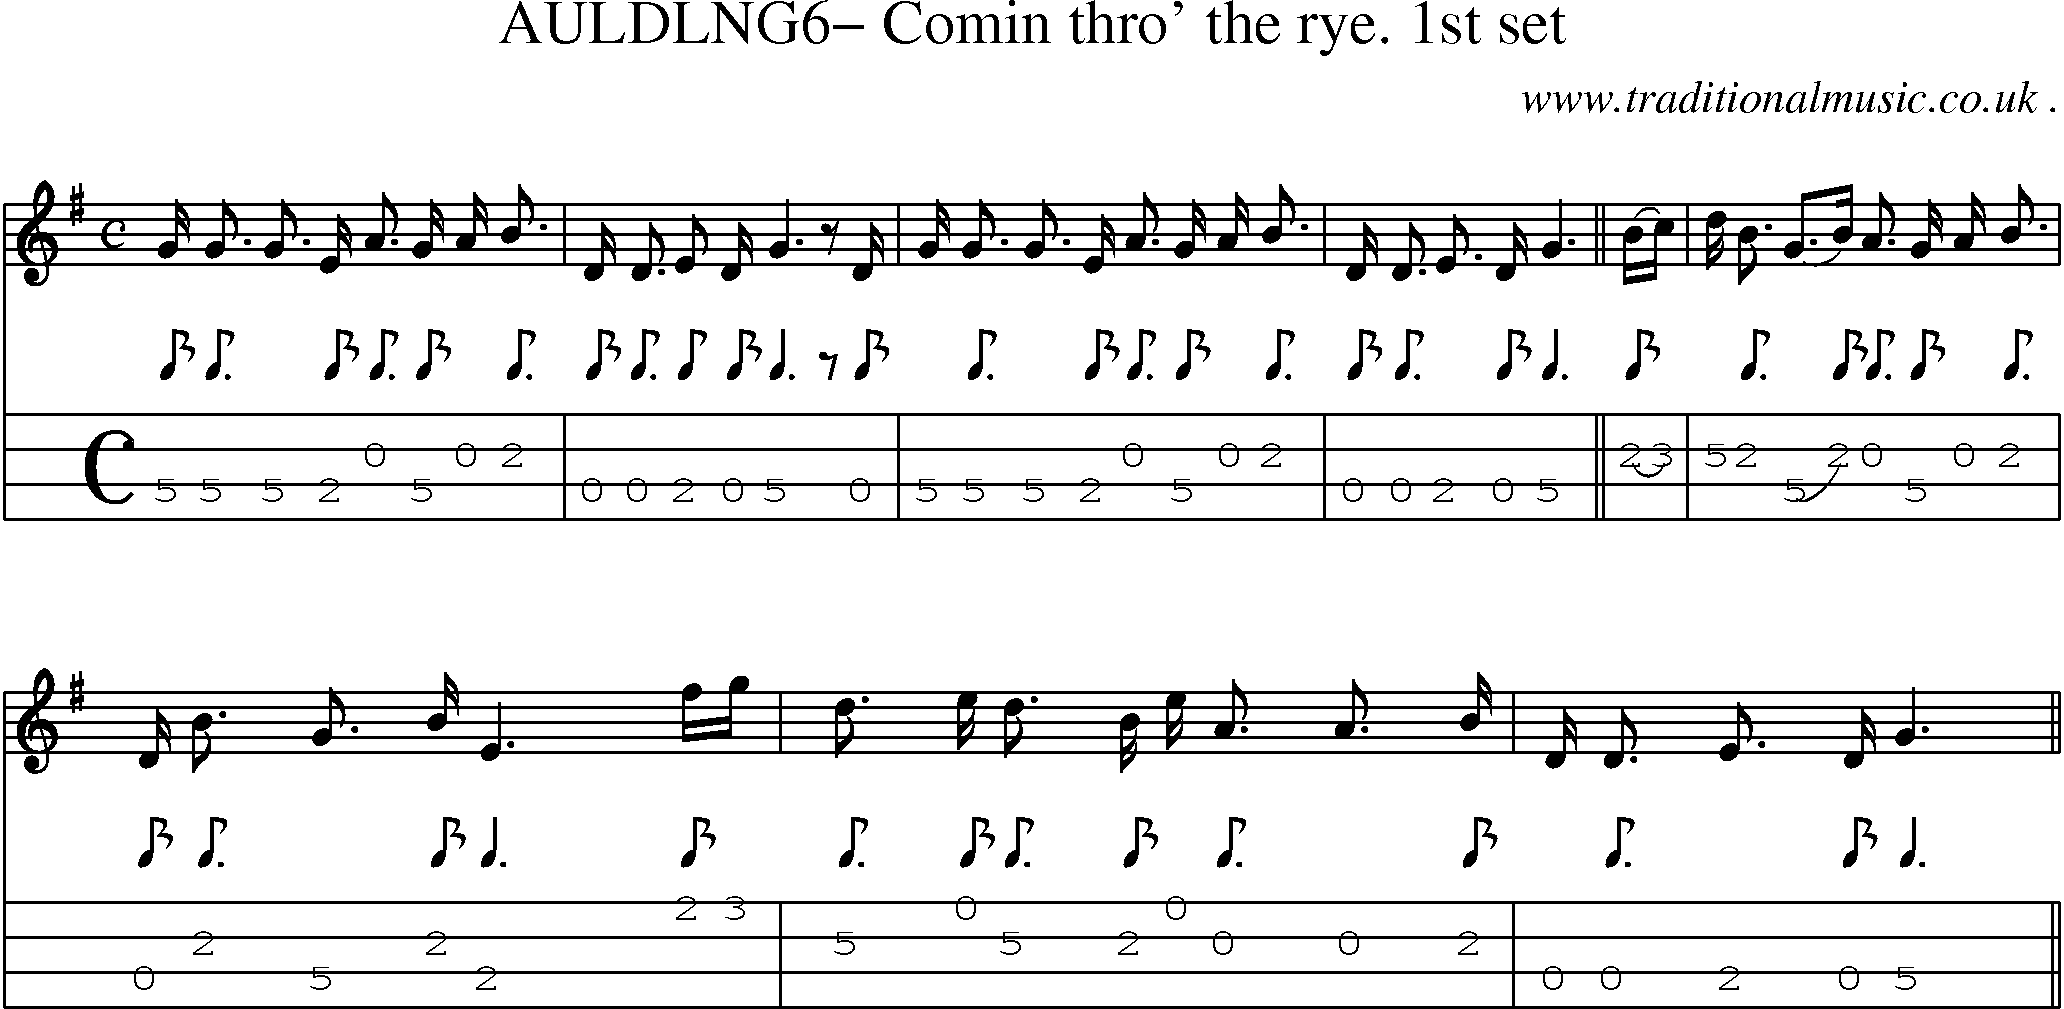 Sheet-Music and Mandolin Tabs for Auldlng6 Comin Thro The Rye 1st Set